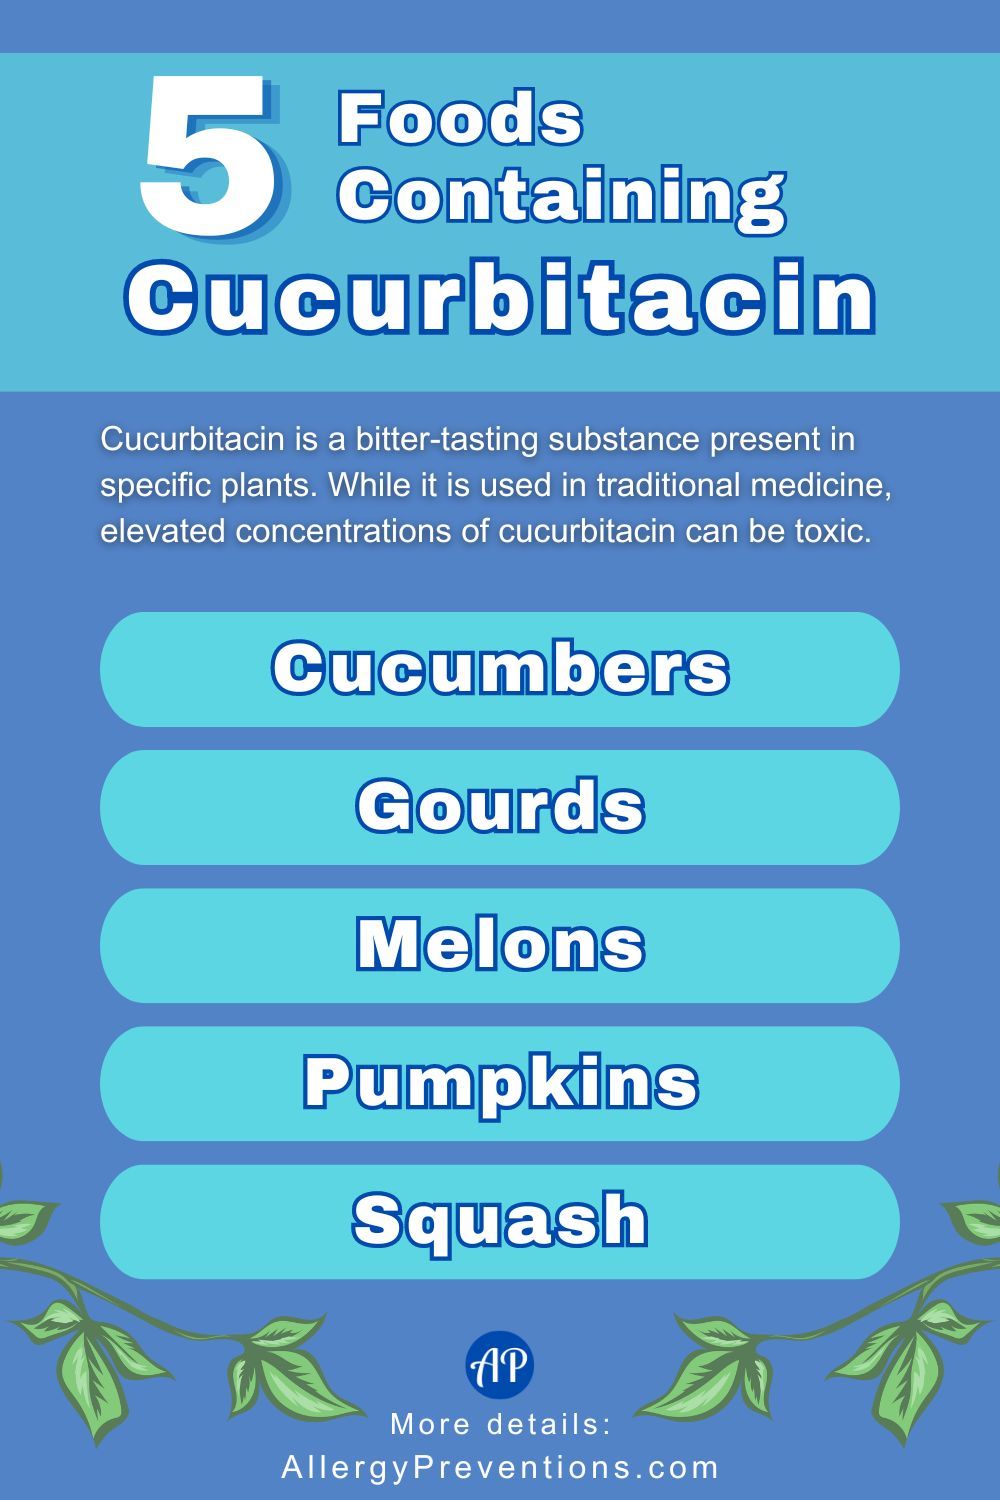 Foods containing cucurbitacin infographic. The cause of a cucumber intolerance could be from cucurbitacin. Cucurbitacin is a bitter-tasting substance present in specific plants. While it is used in traditional medicine, elevated concentrations of cucurbitacin can be toxic. Foods containing cucurbitacin are: cucumbers, gourds, melons, pumpkins, and squash.